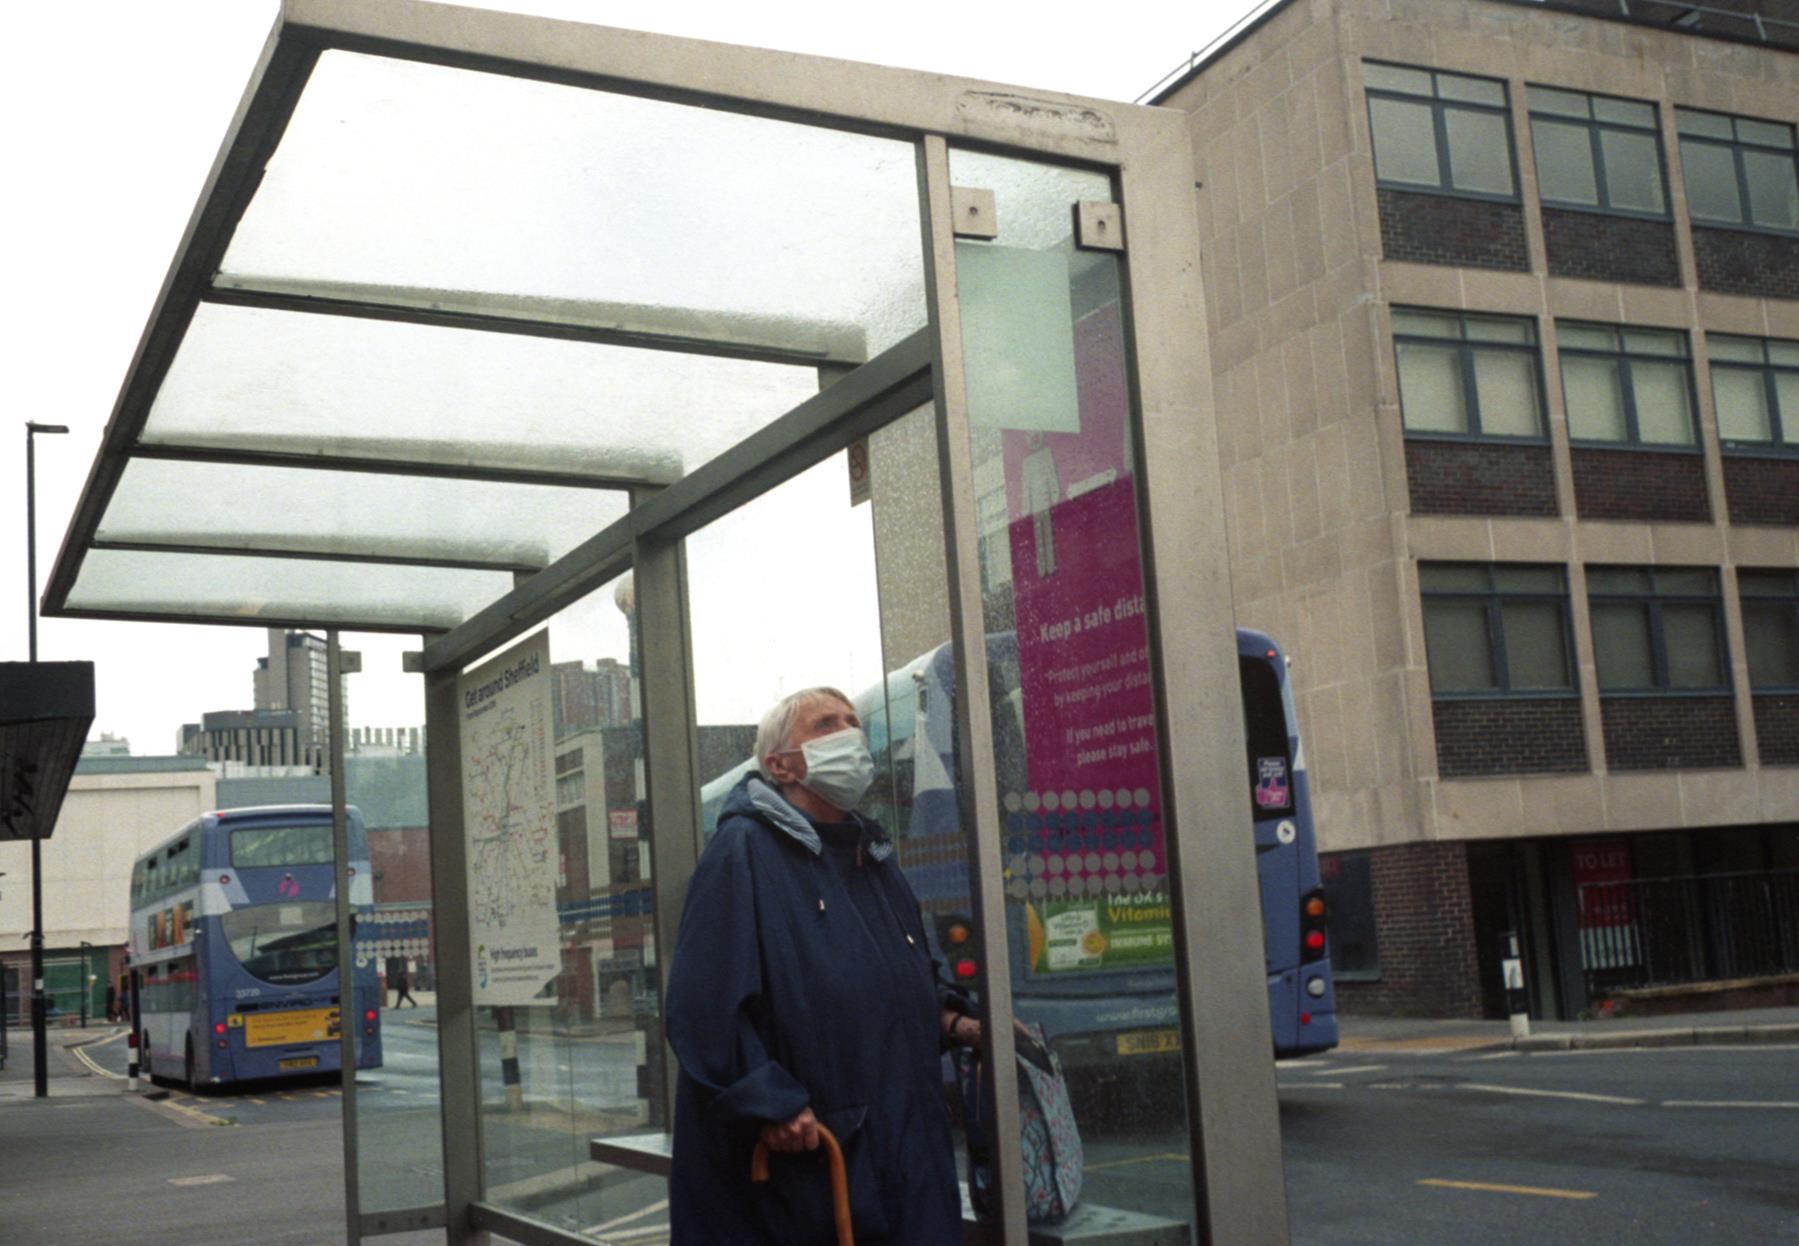 an elder lady at a bus shelter weaing a surgical mask